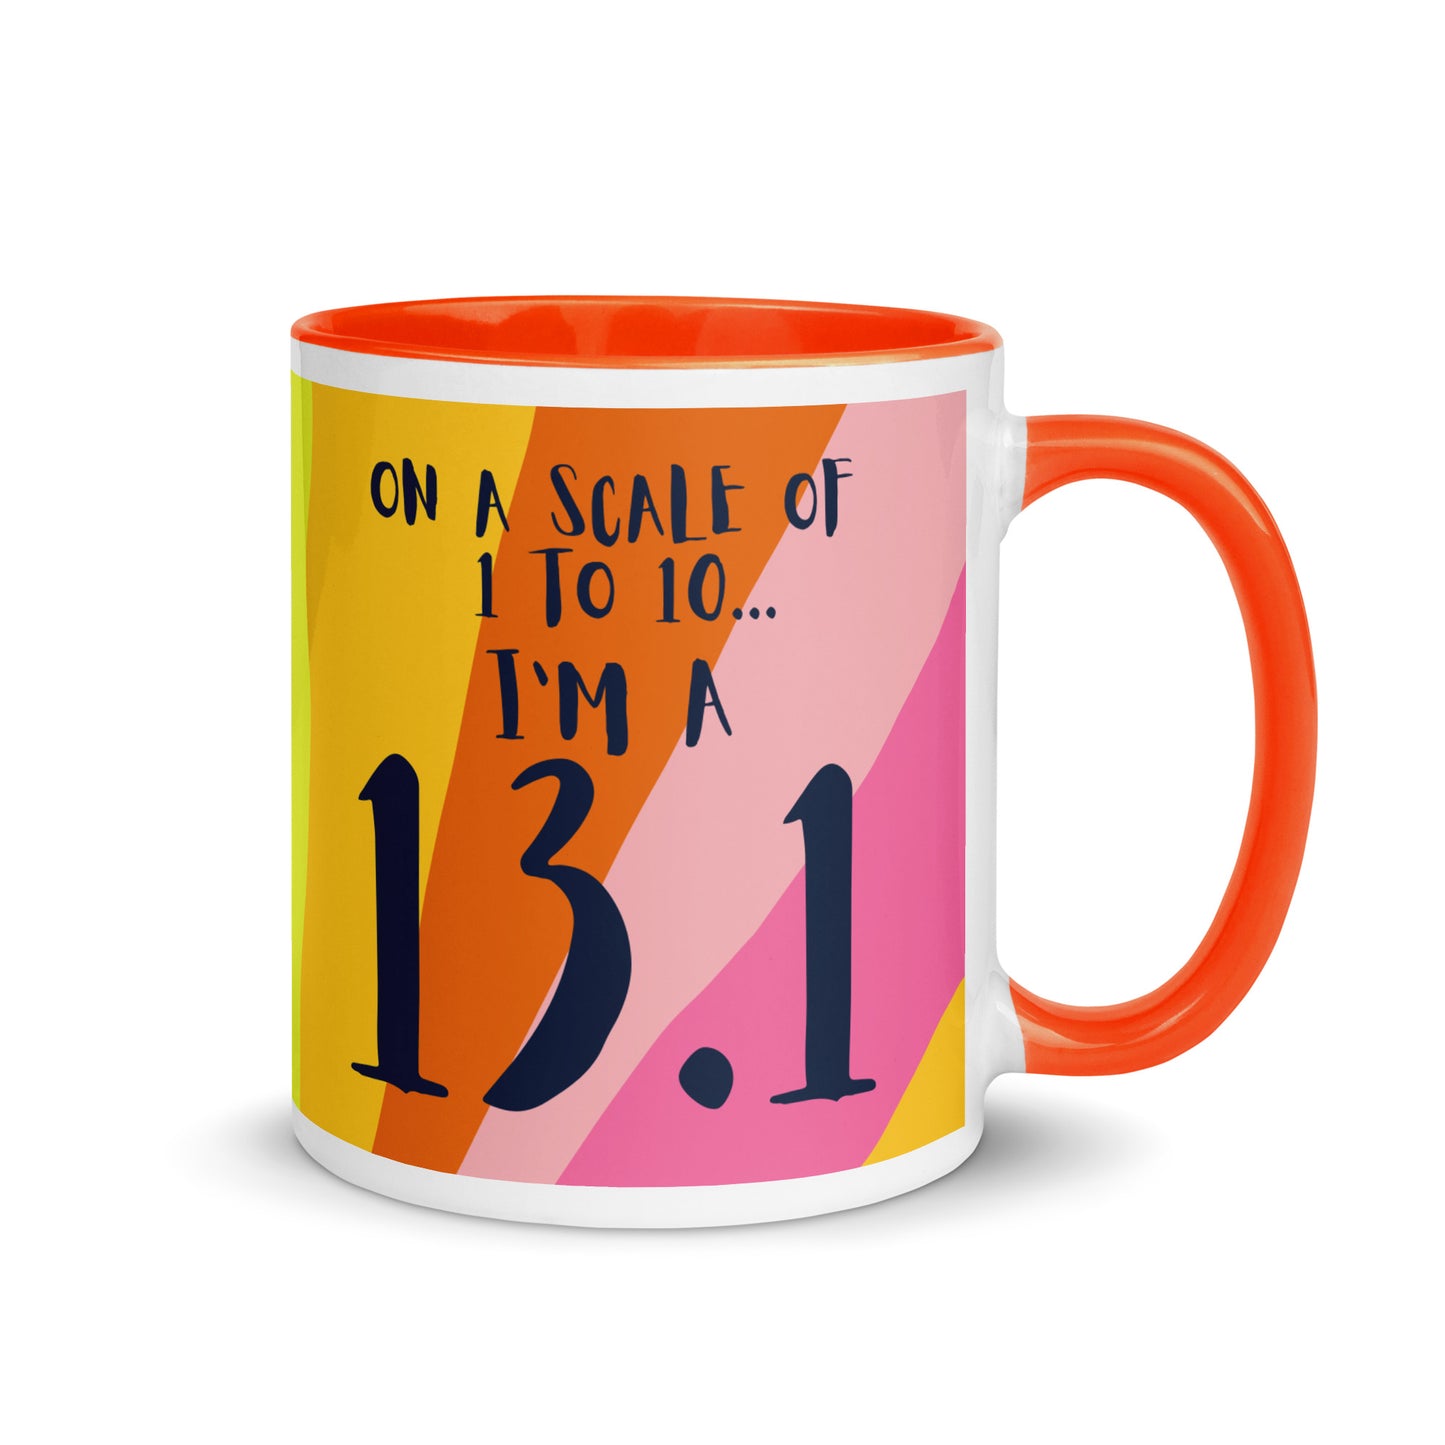 orange rimmed and handled mug with a colourful sun ray style design and the words on a scale of 1 to 10 I'm a 13.1. A gift for half marathon runners